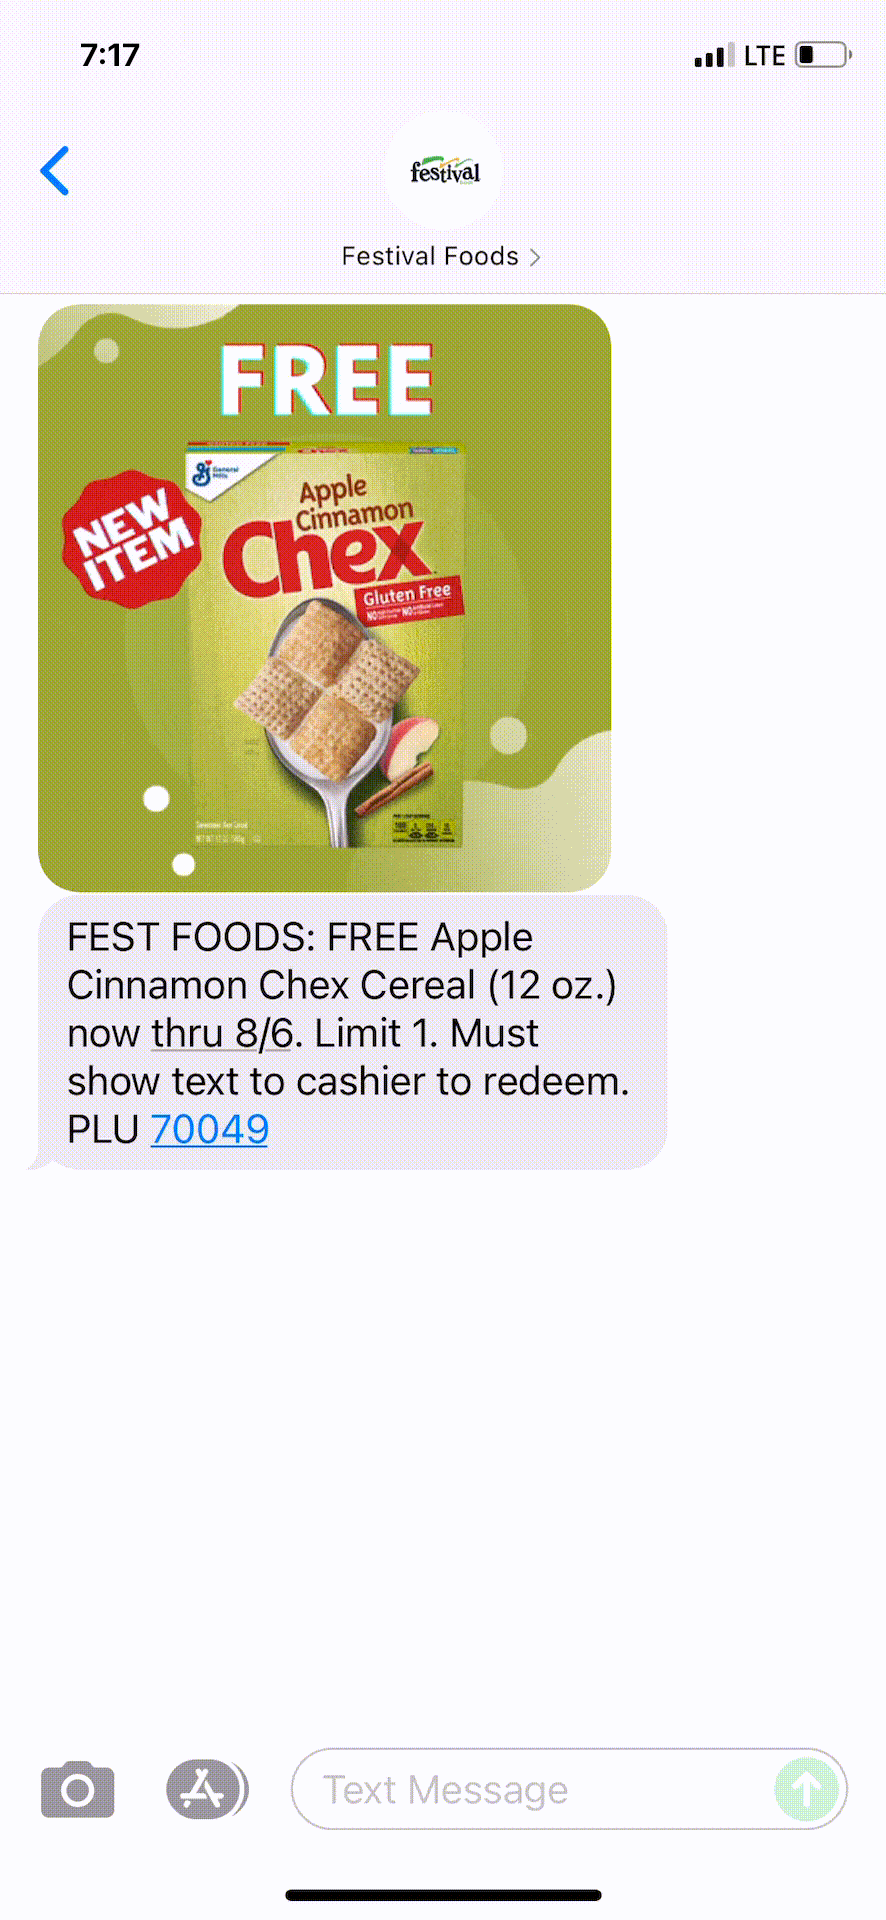 Festival-Foods-Text-Message-Marketing-Example-08.05.2021